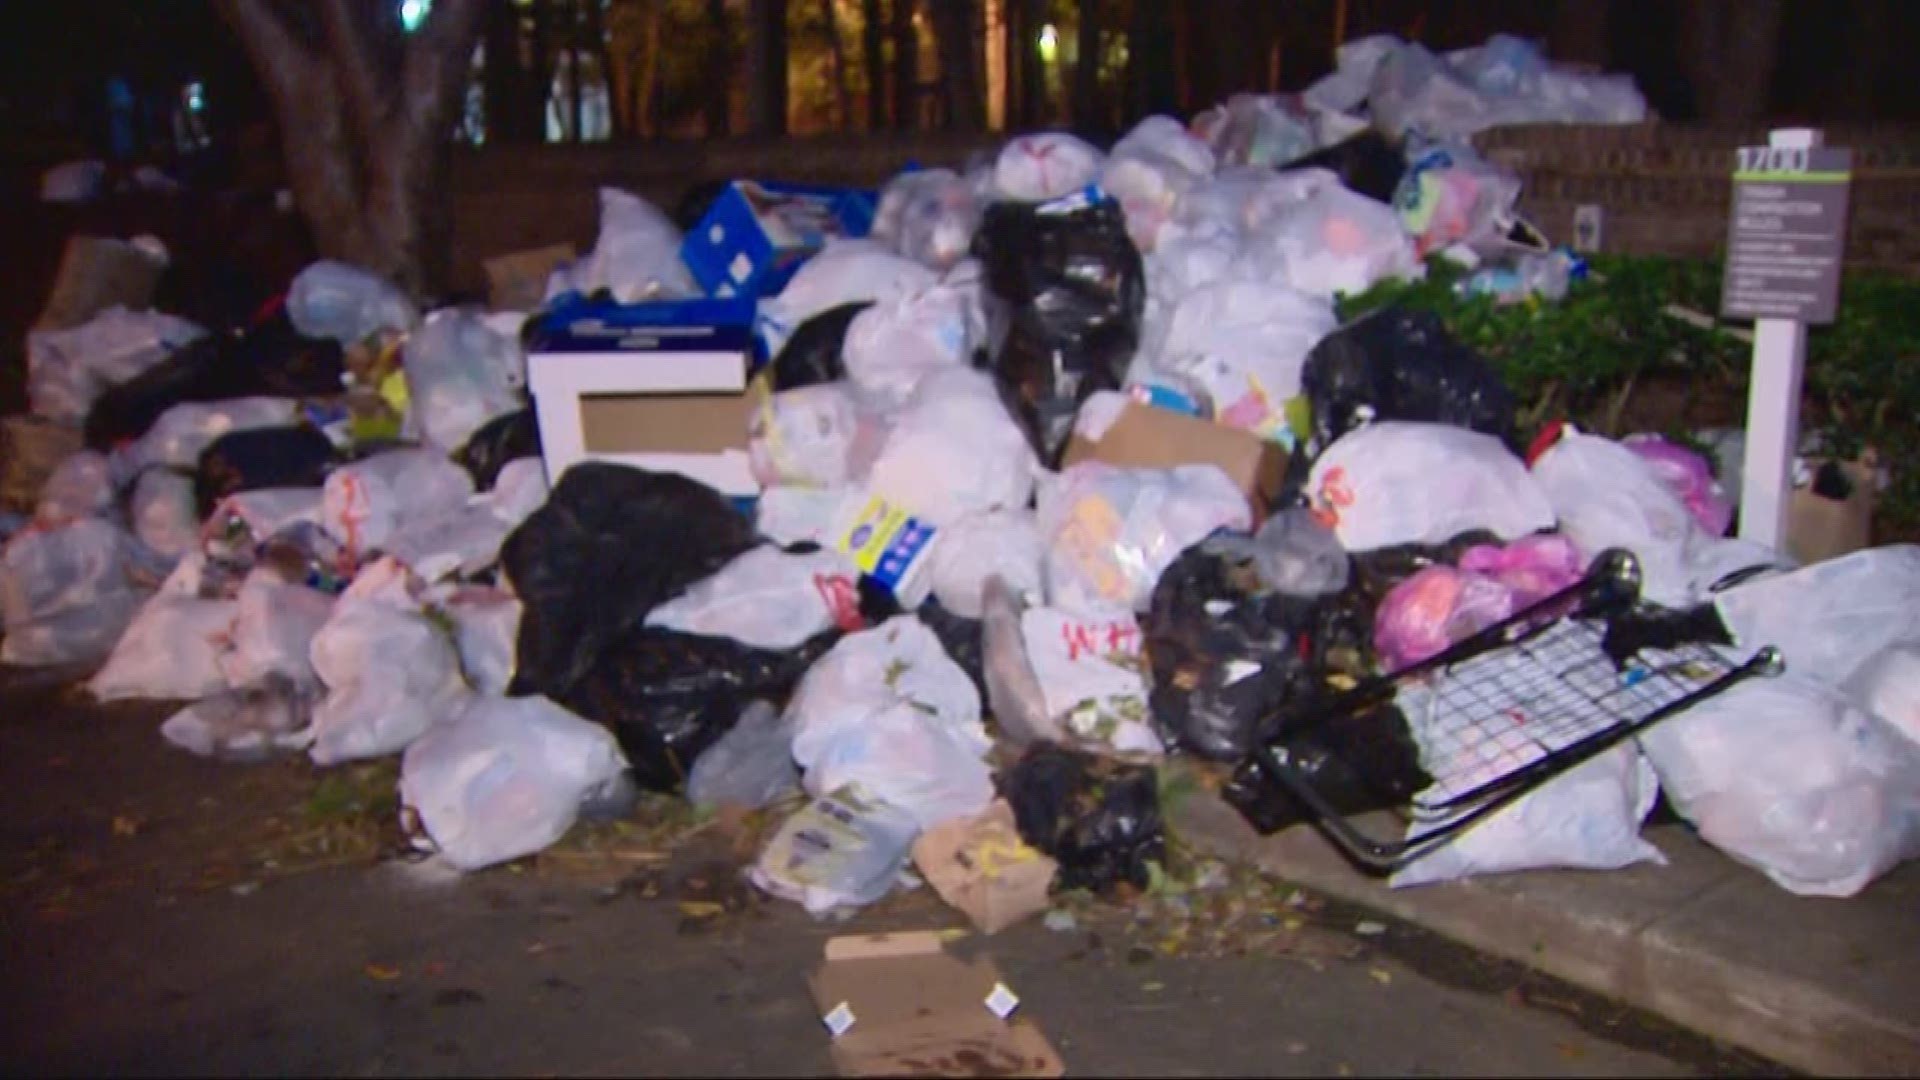 At least a week of trash bags, pizza boxes, and everything in between are piling up and beginning to cause a real stink for the people who live in one Southeast Charlotte neighborhood.